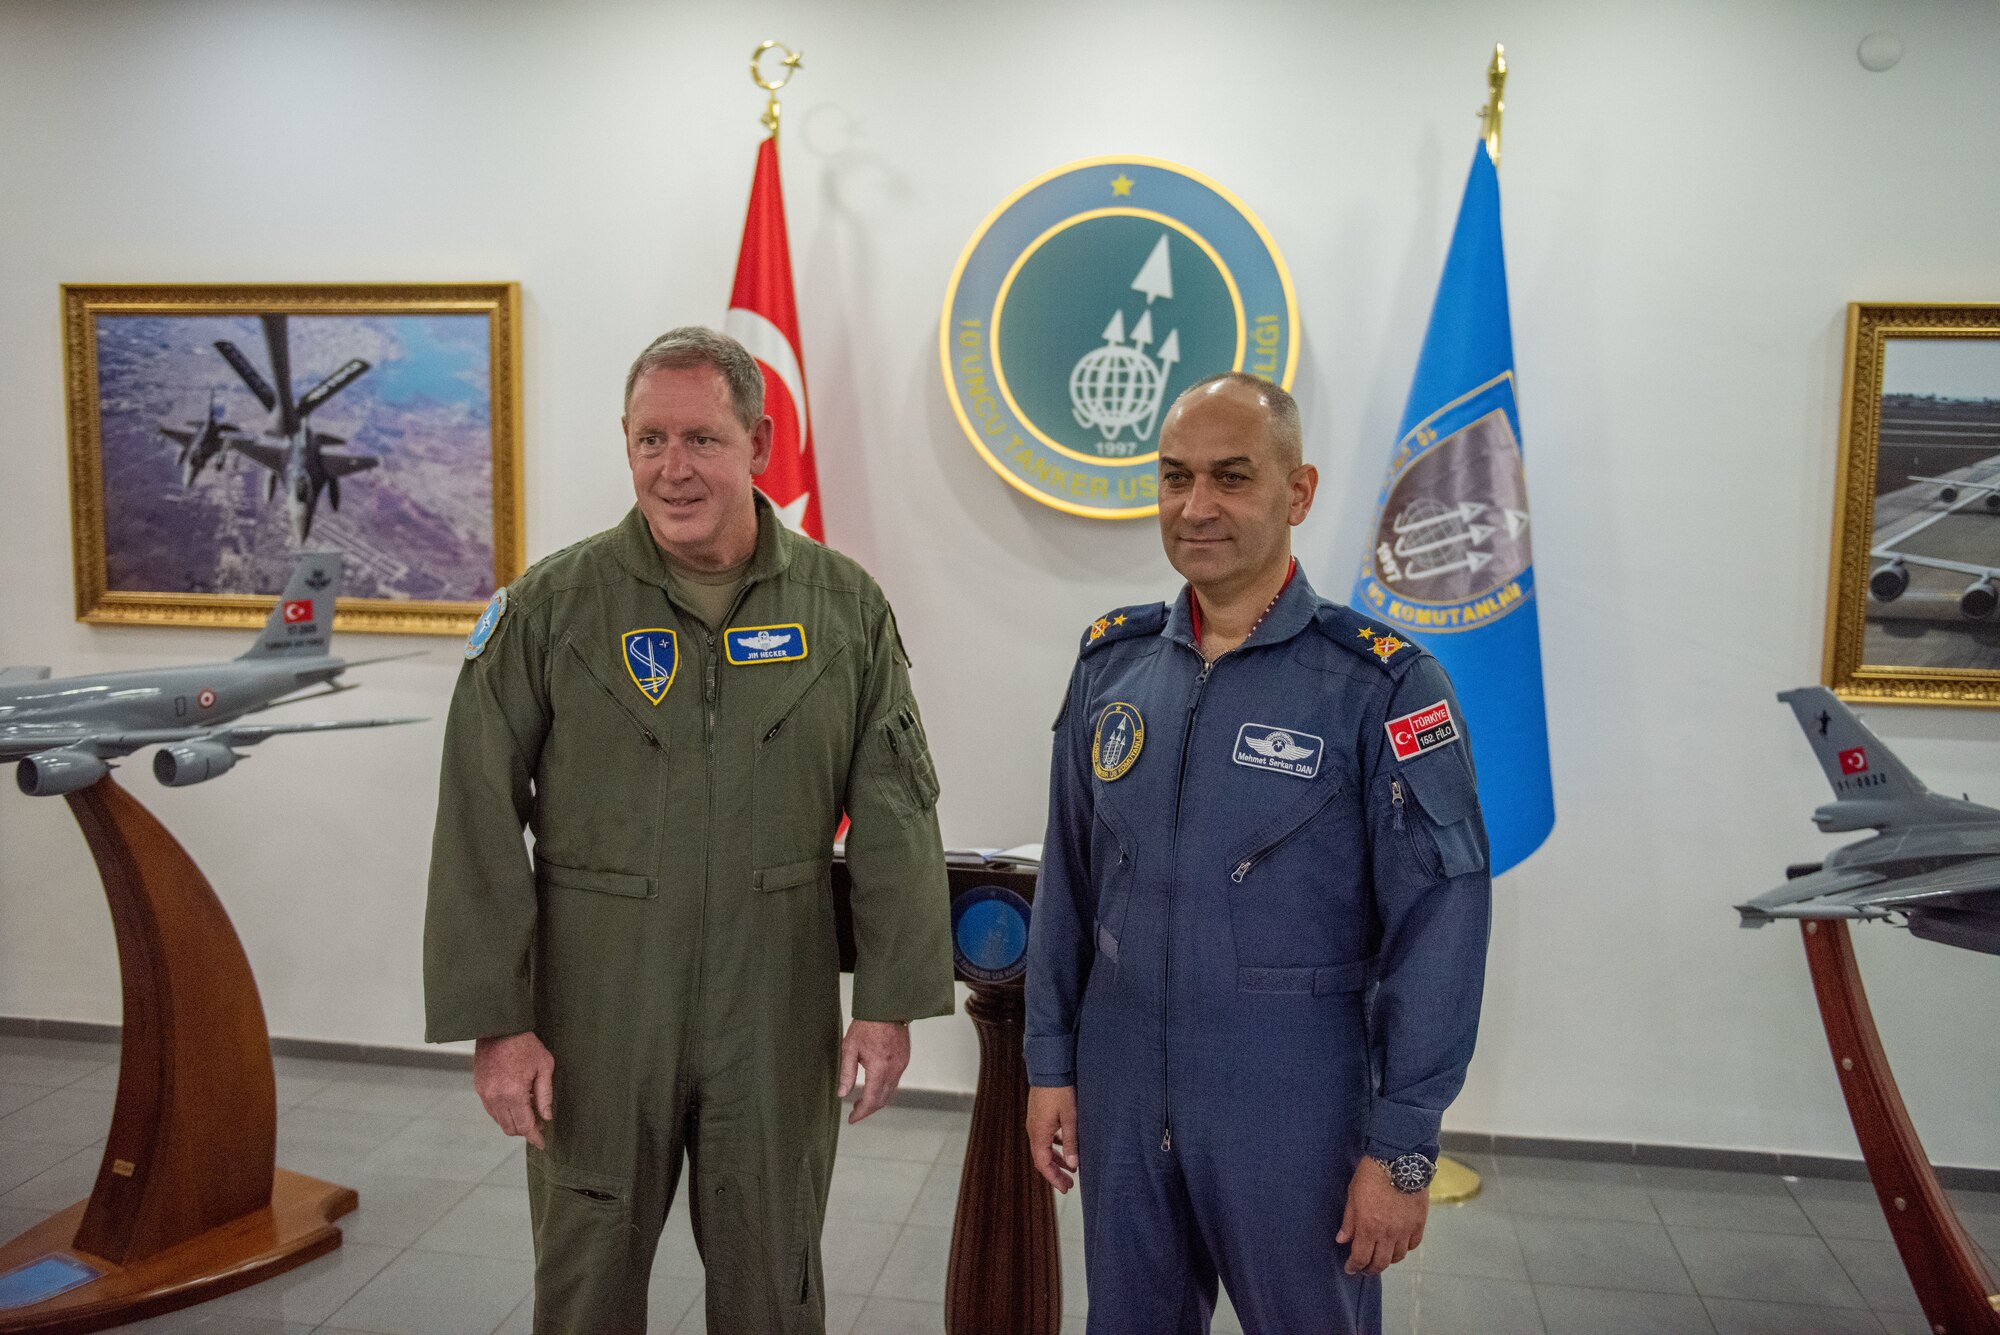 A man in a green flight suit stands next to a man in a blue flight suit. They're flanked by flags and model aircraft.